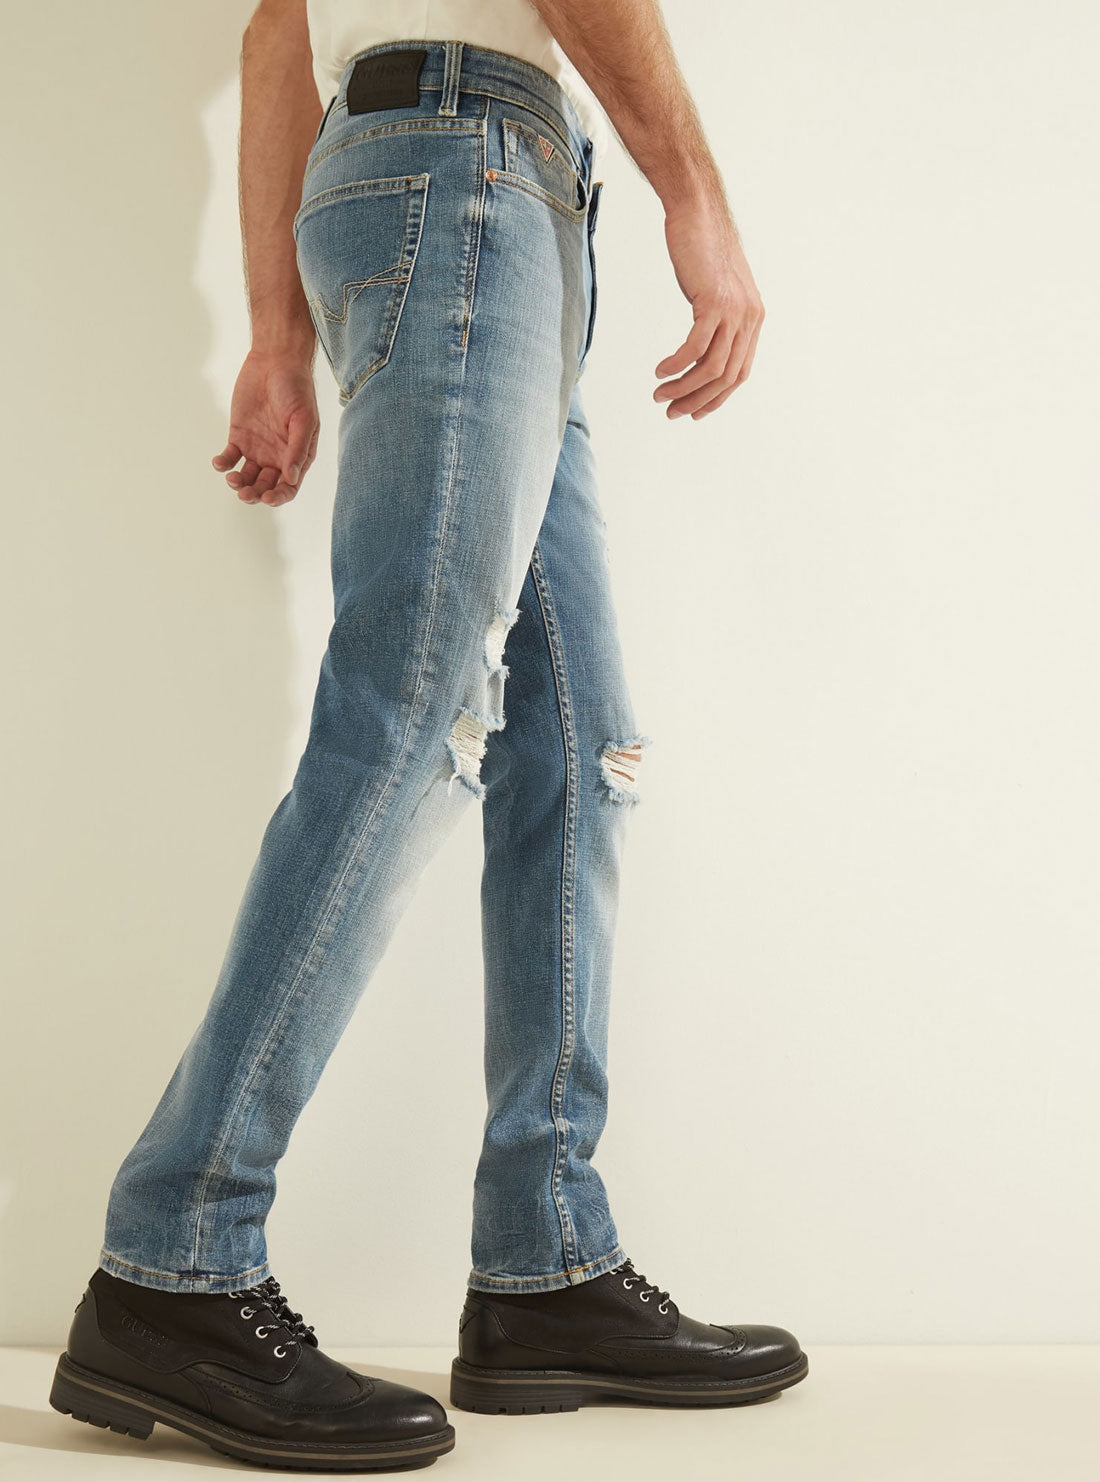 GUESS Mens Mid-Rise Slim Tapered Denim Jean in Light Tide Wash    MBGAS23041B Side View